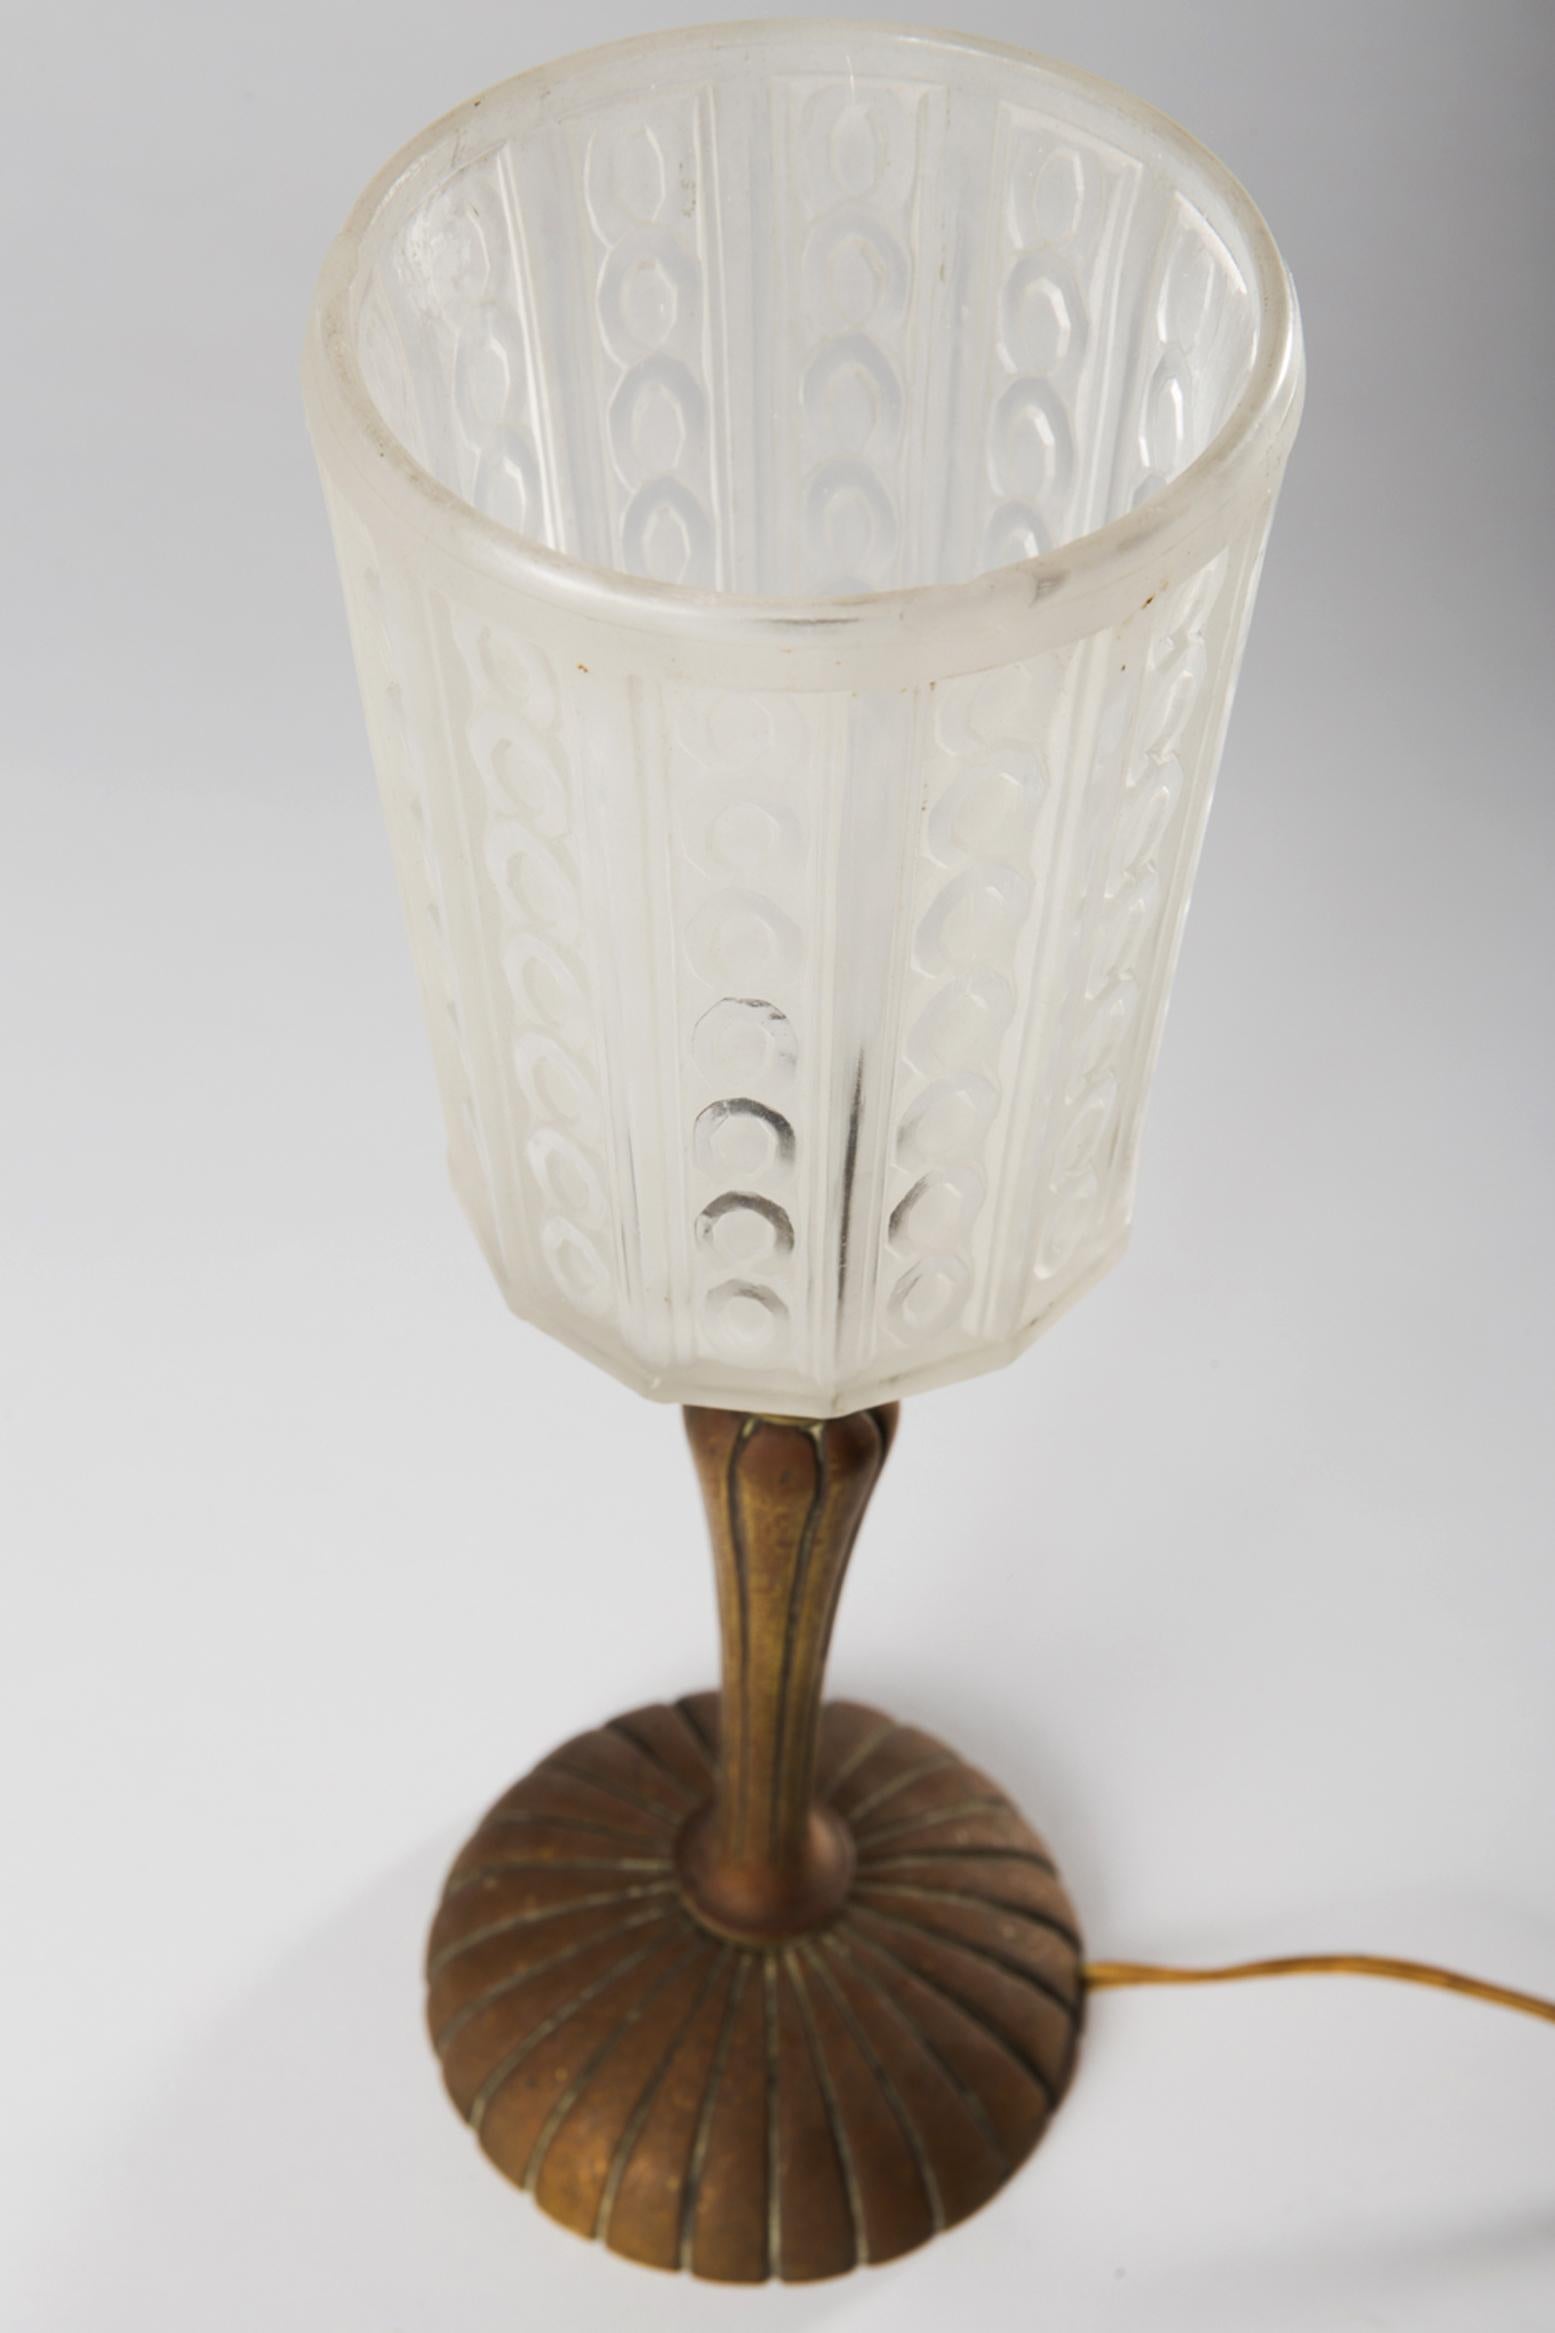 Art Deco table lamp by Hettier & Vincent, France from the 1930s.
Pressed glass, metal construction of a baluster-shaped metal base and a slightly conical, dodecagonal glass shade, a focal point, on the screen with maker's stamping, 
Dimension: H